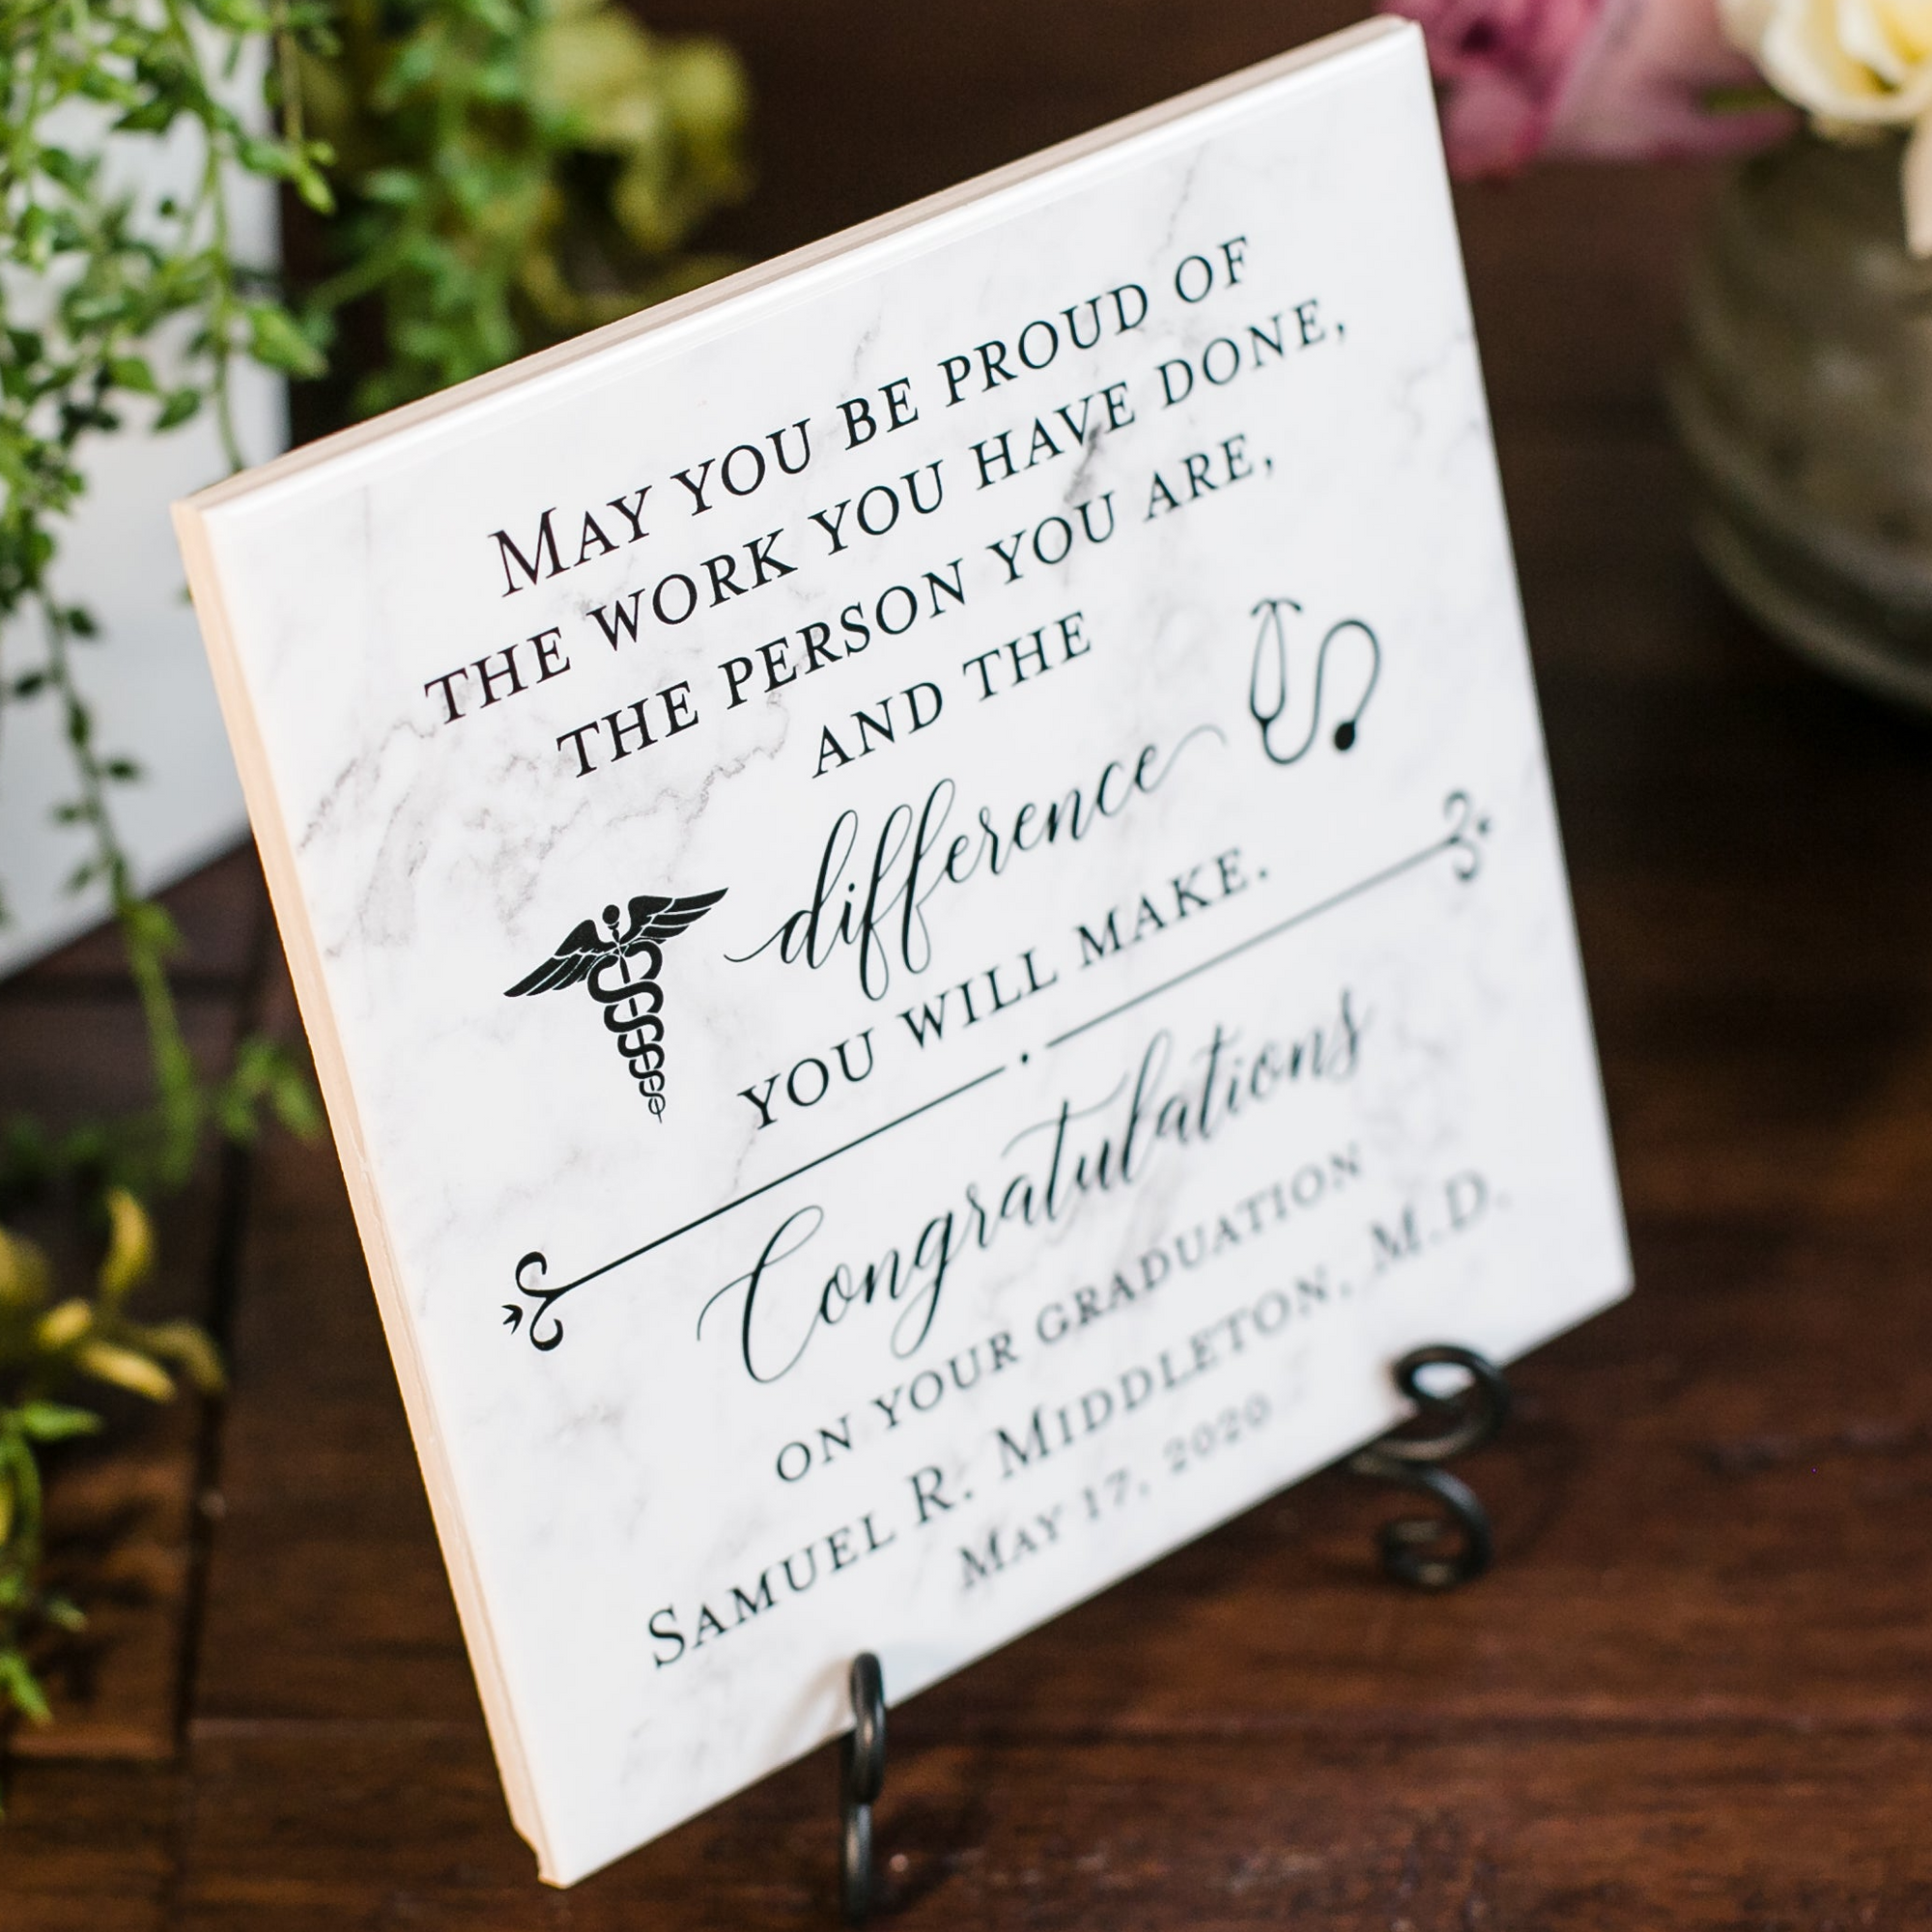 a sign on a table with flowers in the background